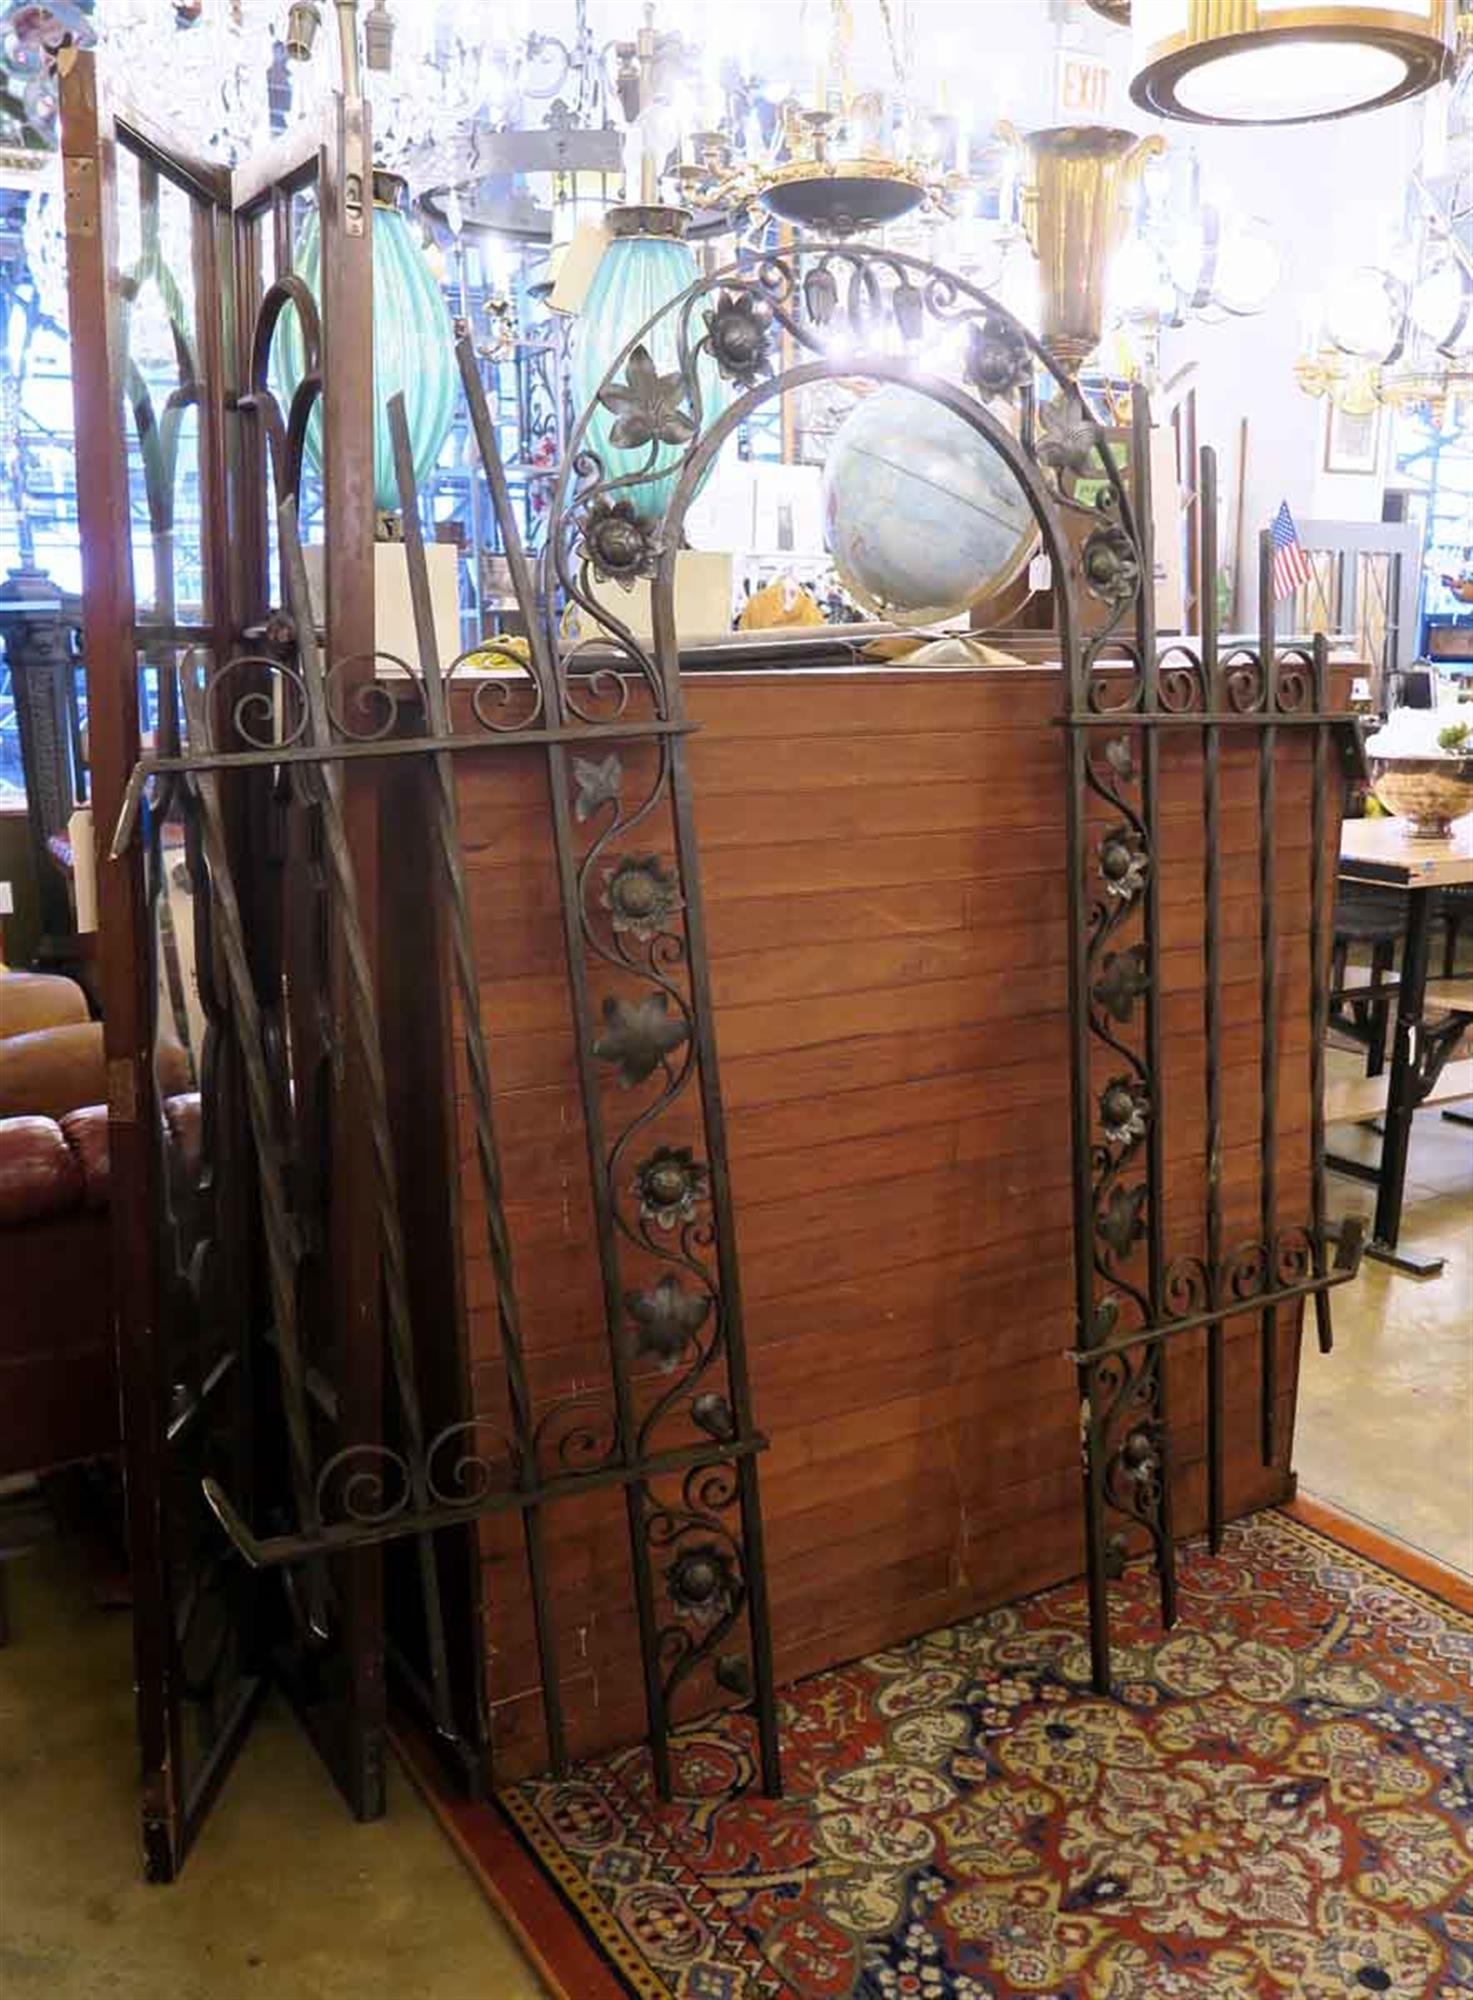 1920s cast and wrought iron gateway arch with Art Nouveau details and a black finish. This can be seen at our 2420 Broadway location on the upper west side in Manhattan.